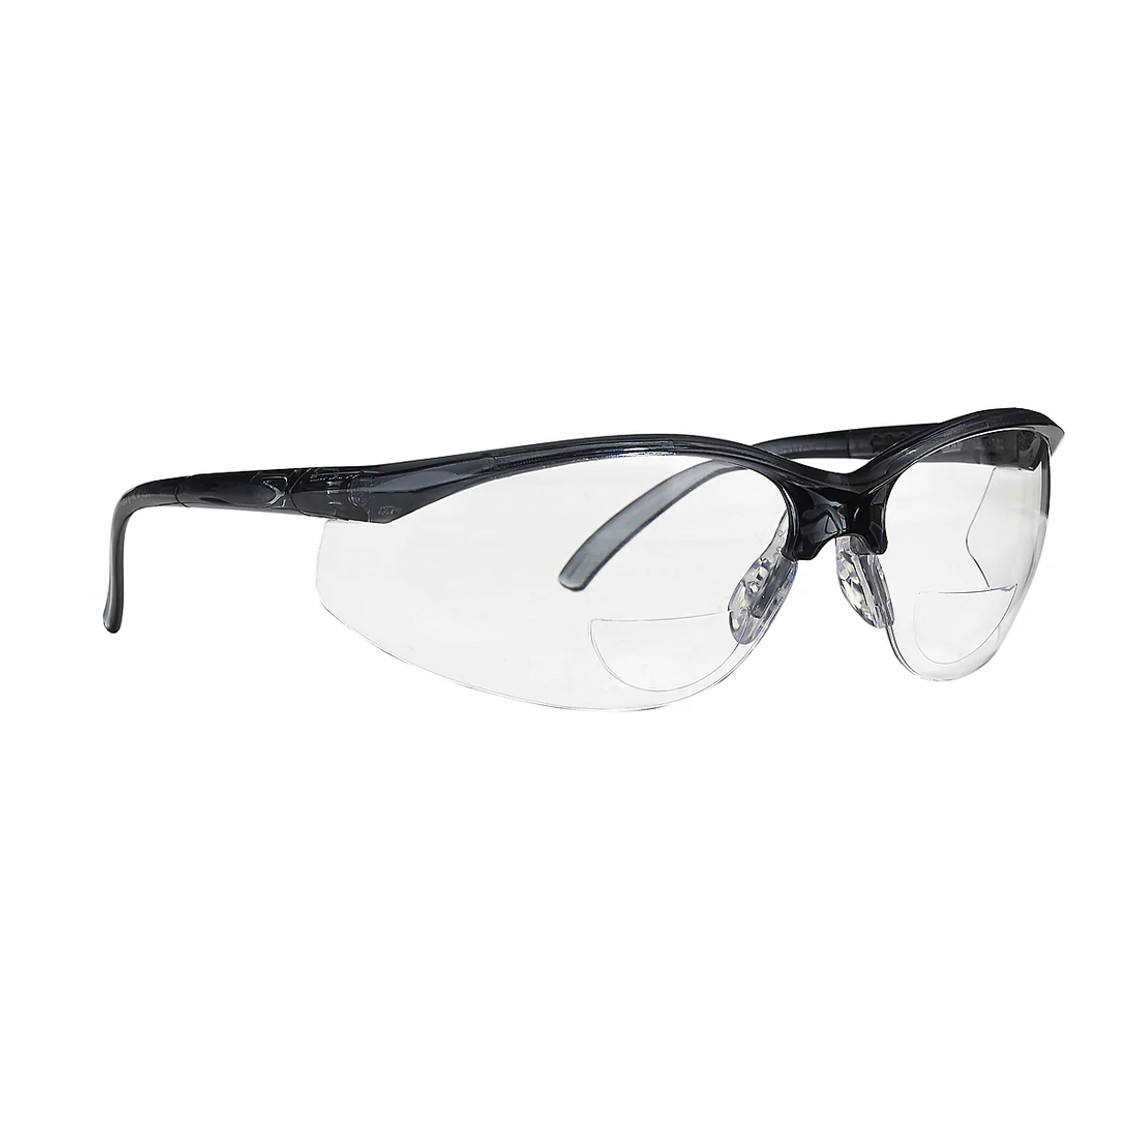 ForceField Anti-Fog, Scratch-Resistant Safety Glasses - UV Lens (12 Pairs/Box) | SafetyApparel.ca